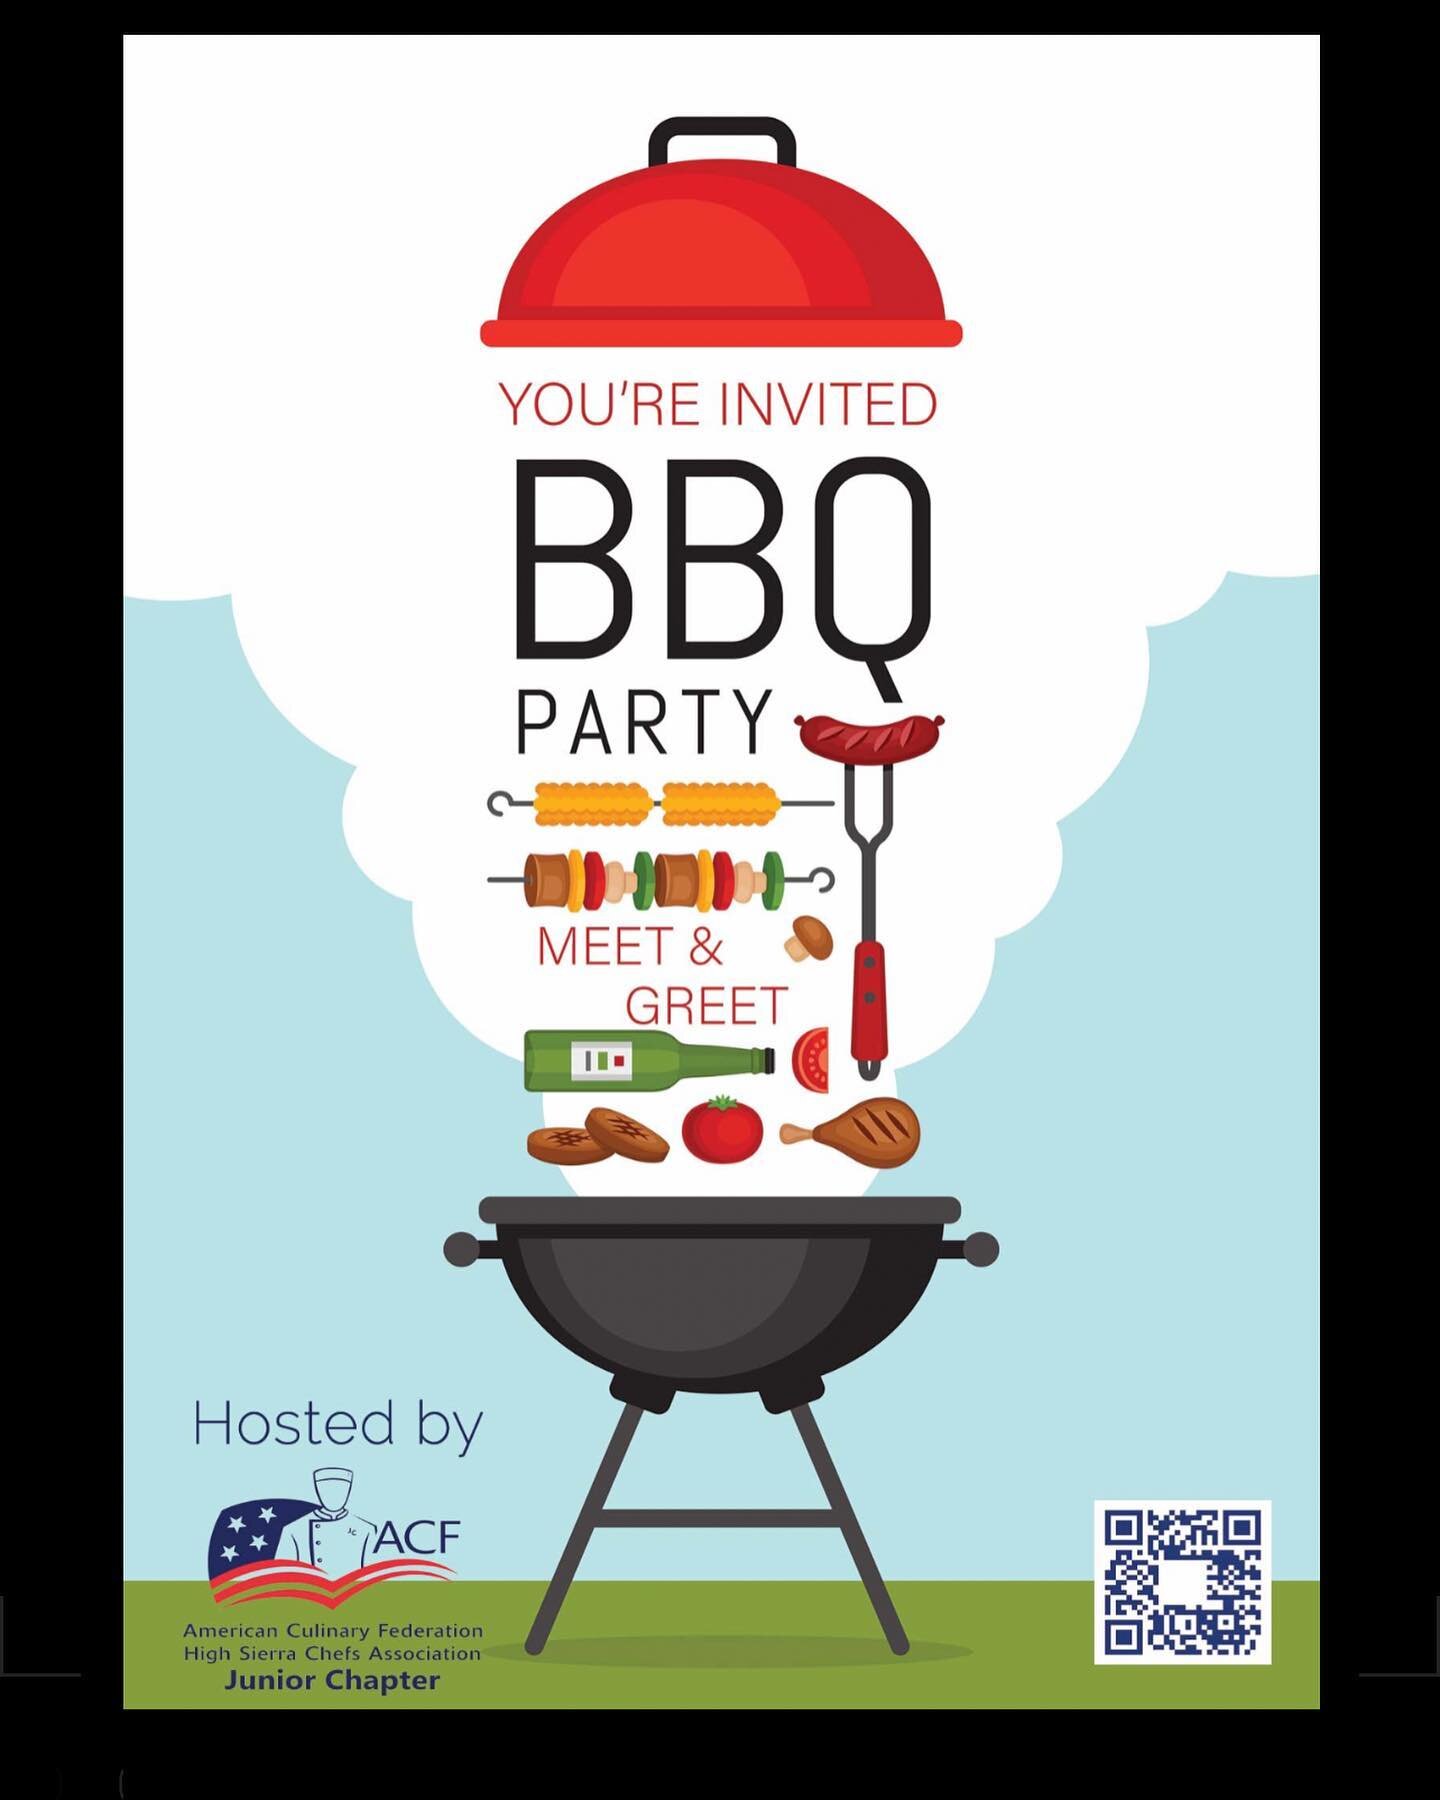 All ACF Members, prospective members and their families are invited to our Summer BBQ.  Aug 14; 5:30-8pm @homagereno Please RSVP bio.site/acfhsca